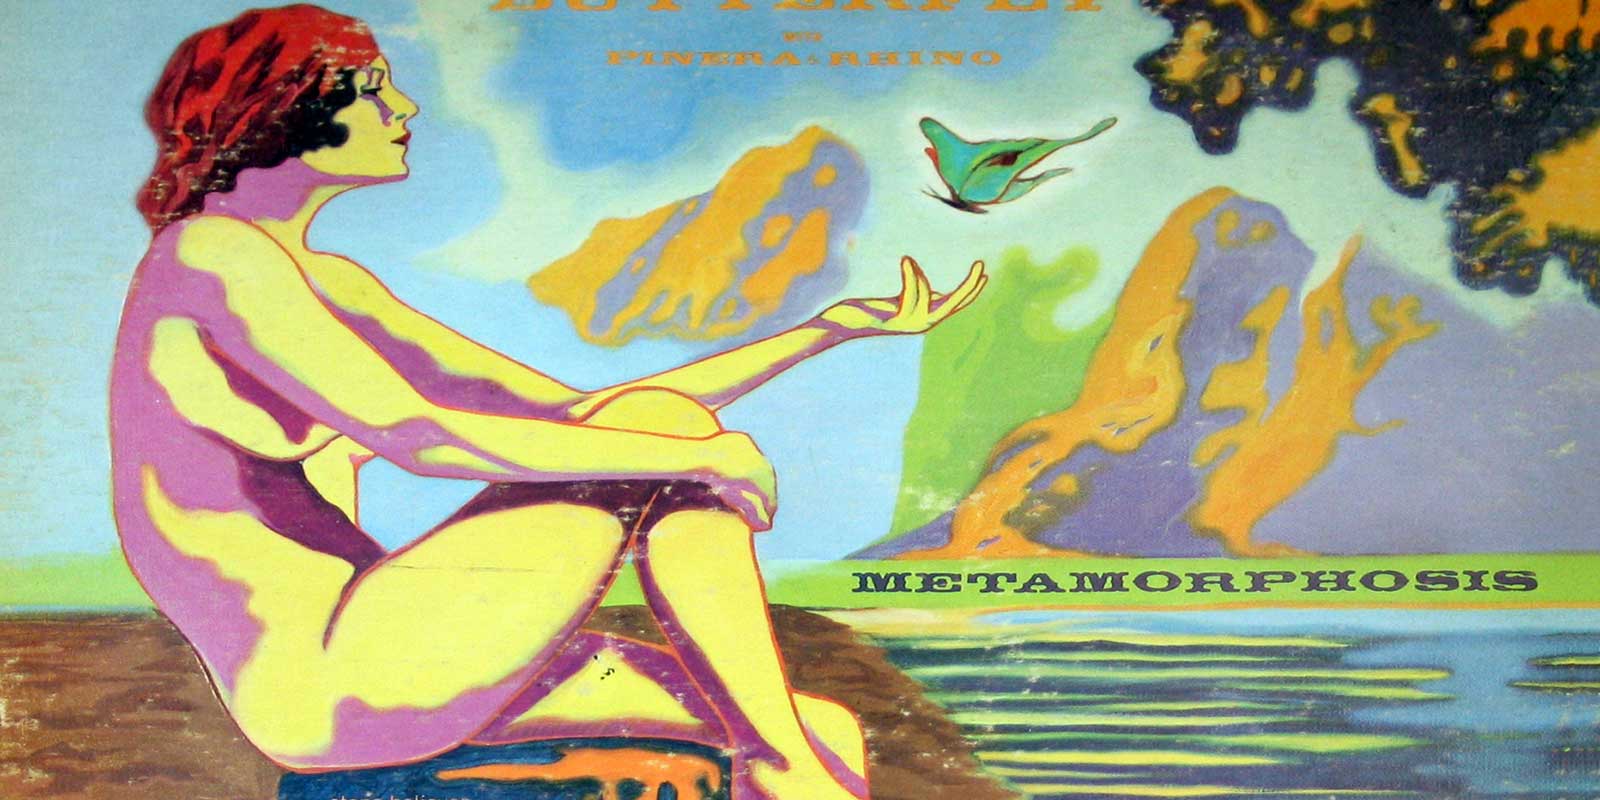 large album front cover photo of: IRON BUTTERFLY Vinyl Records from the 1970s  